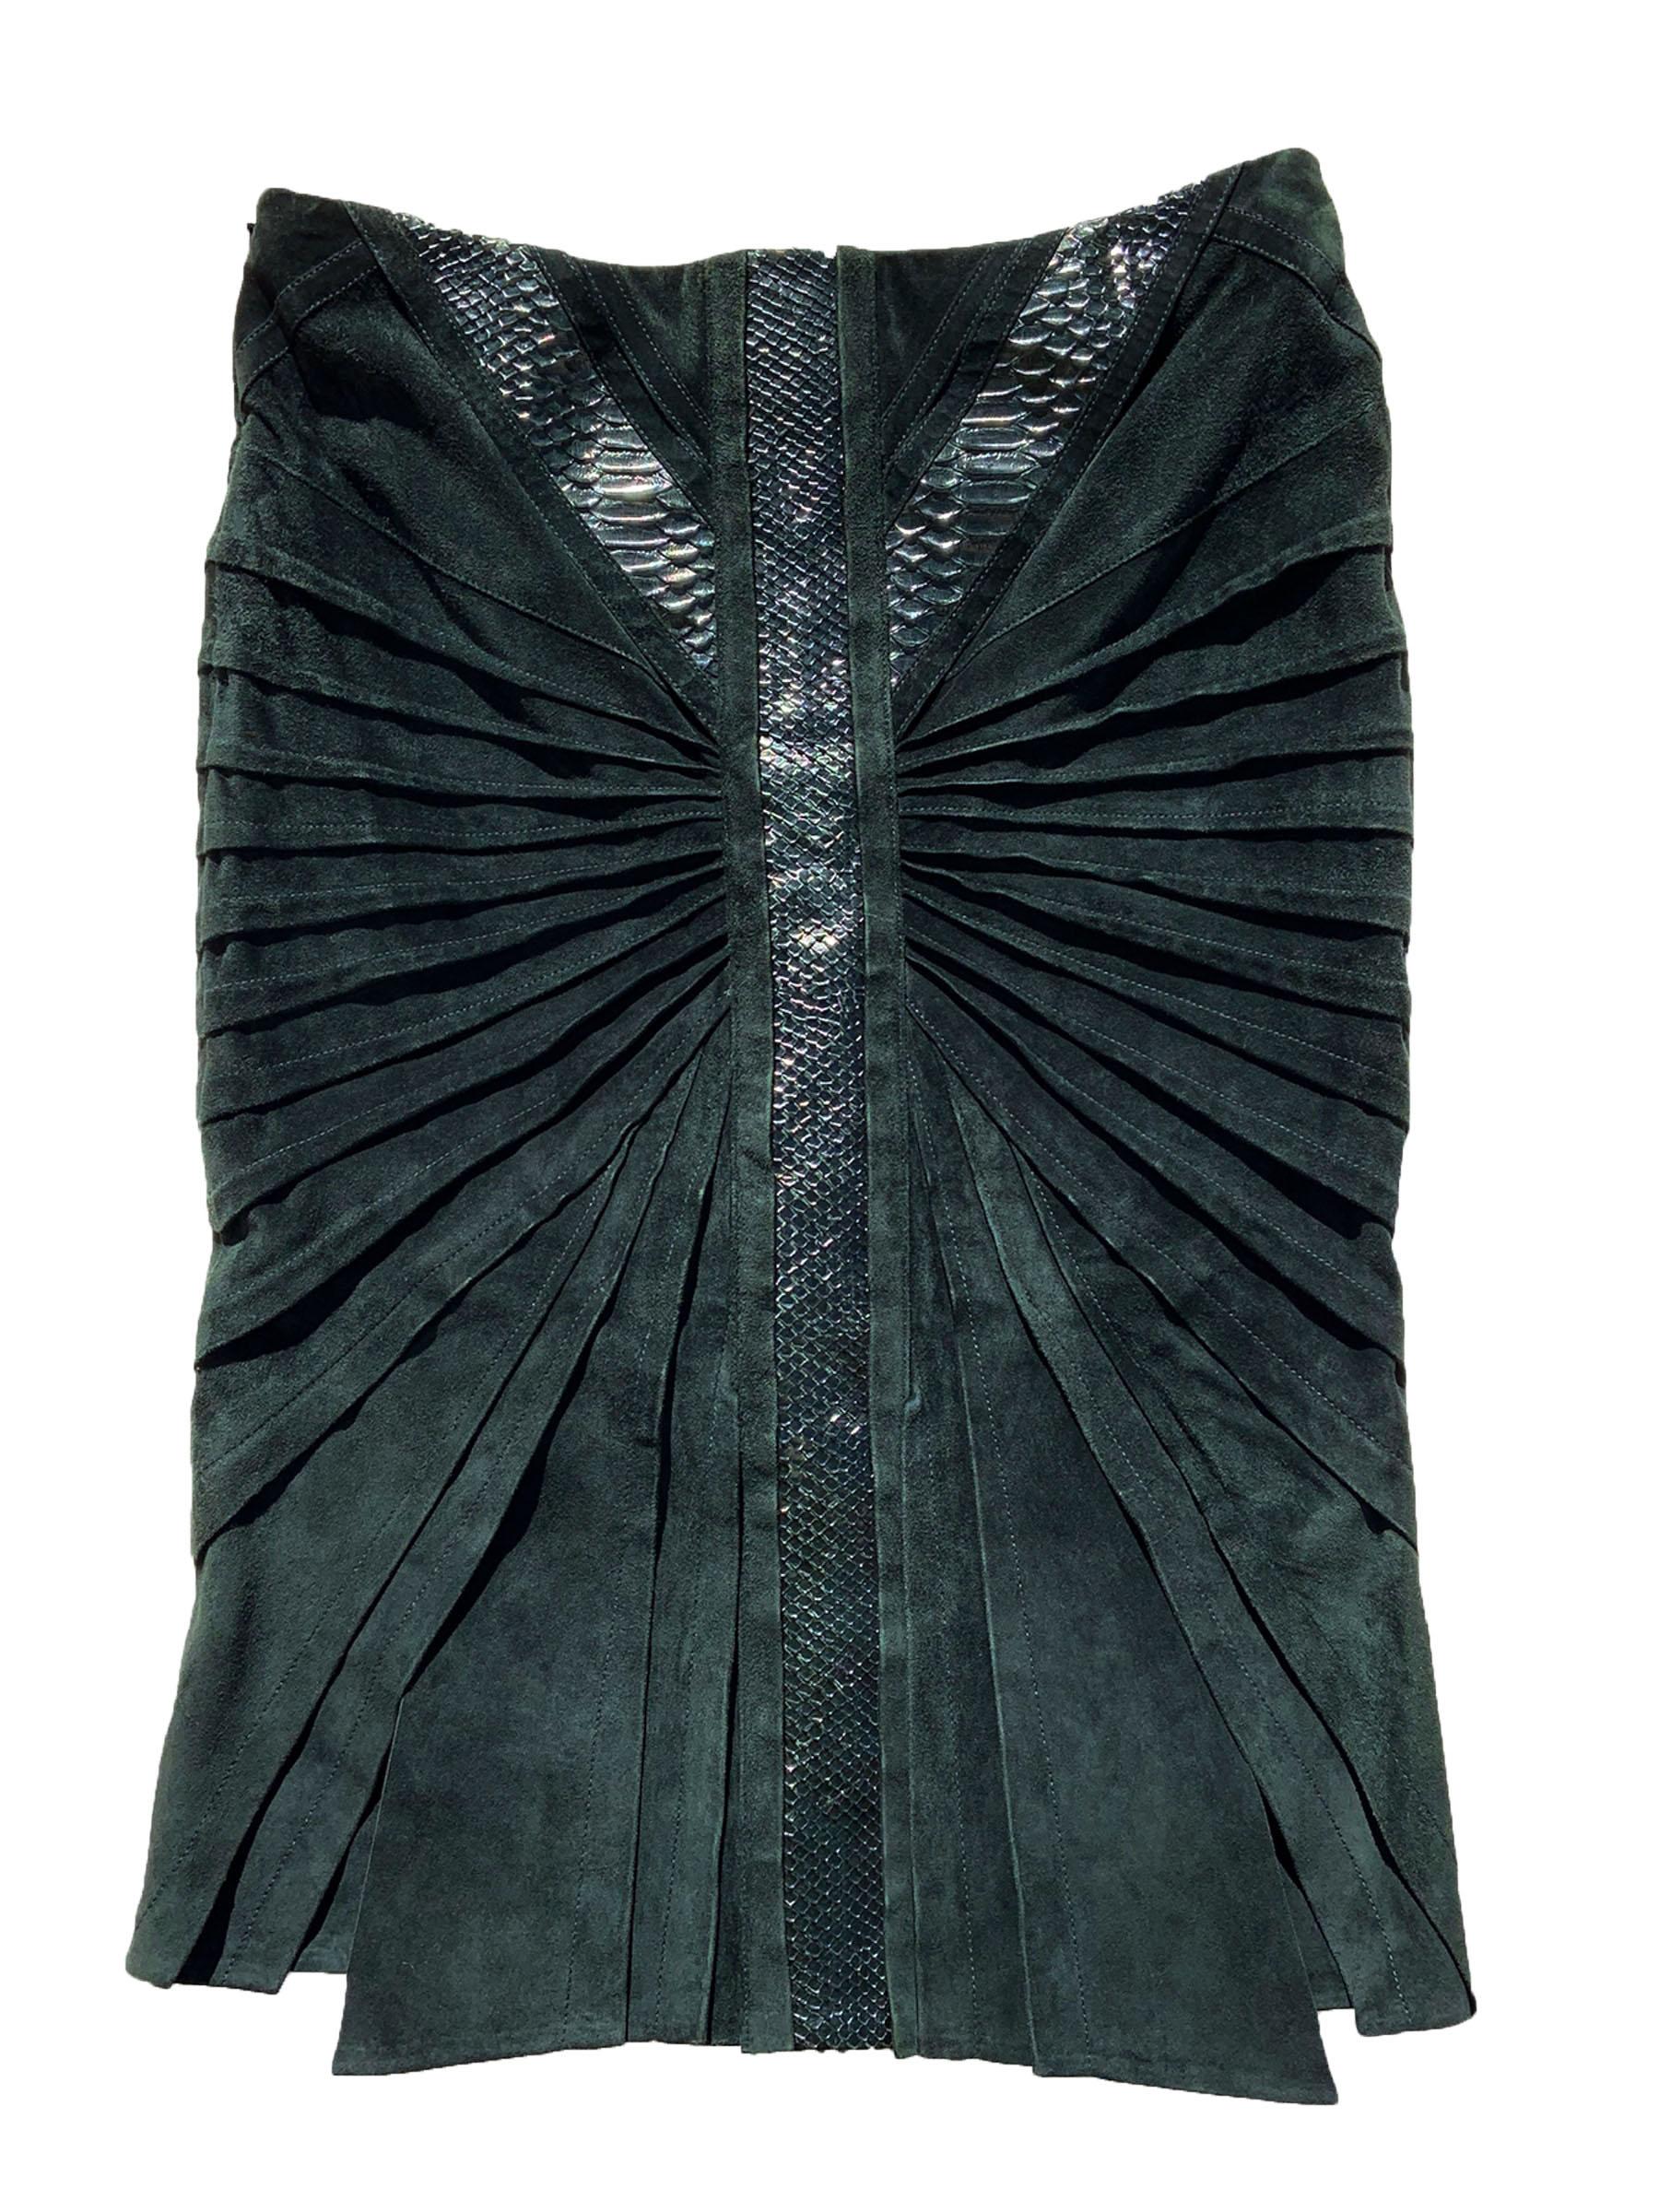 New Tom Ford for Gucci F/W 2004 Dark Green Suede Python Trim Skirt It 42 & 40 For Sale 3